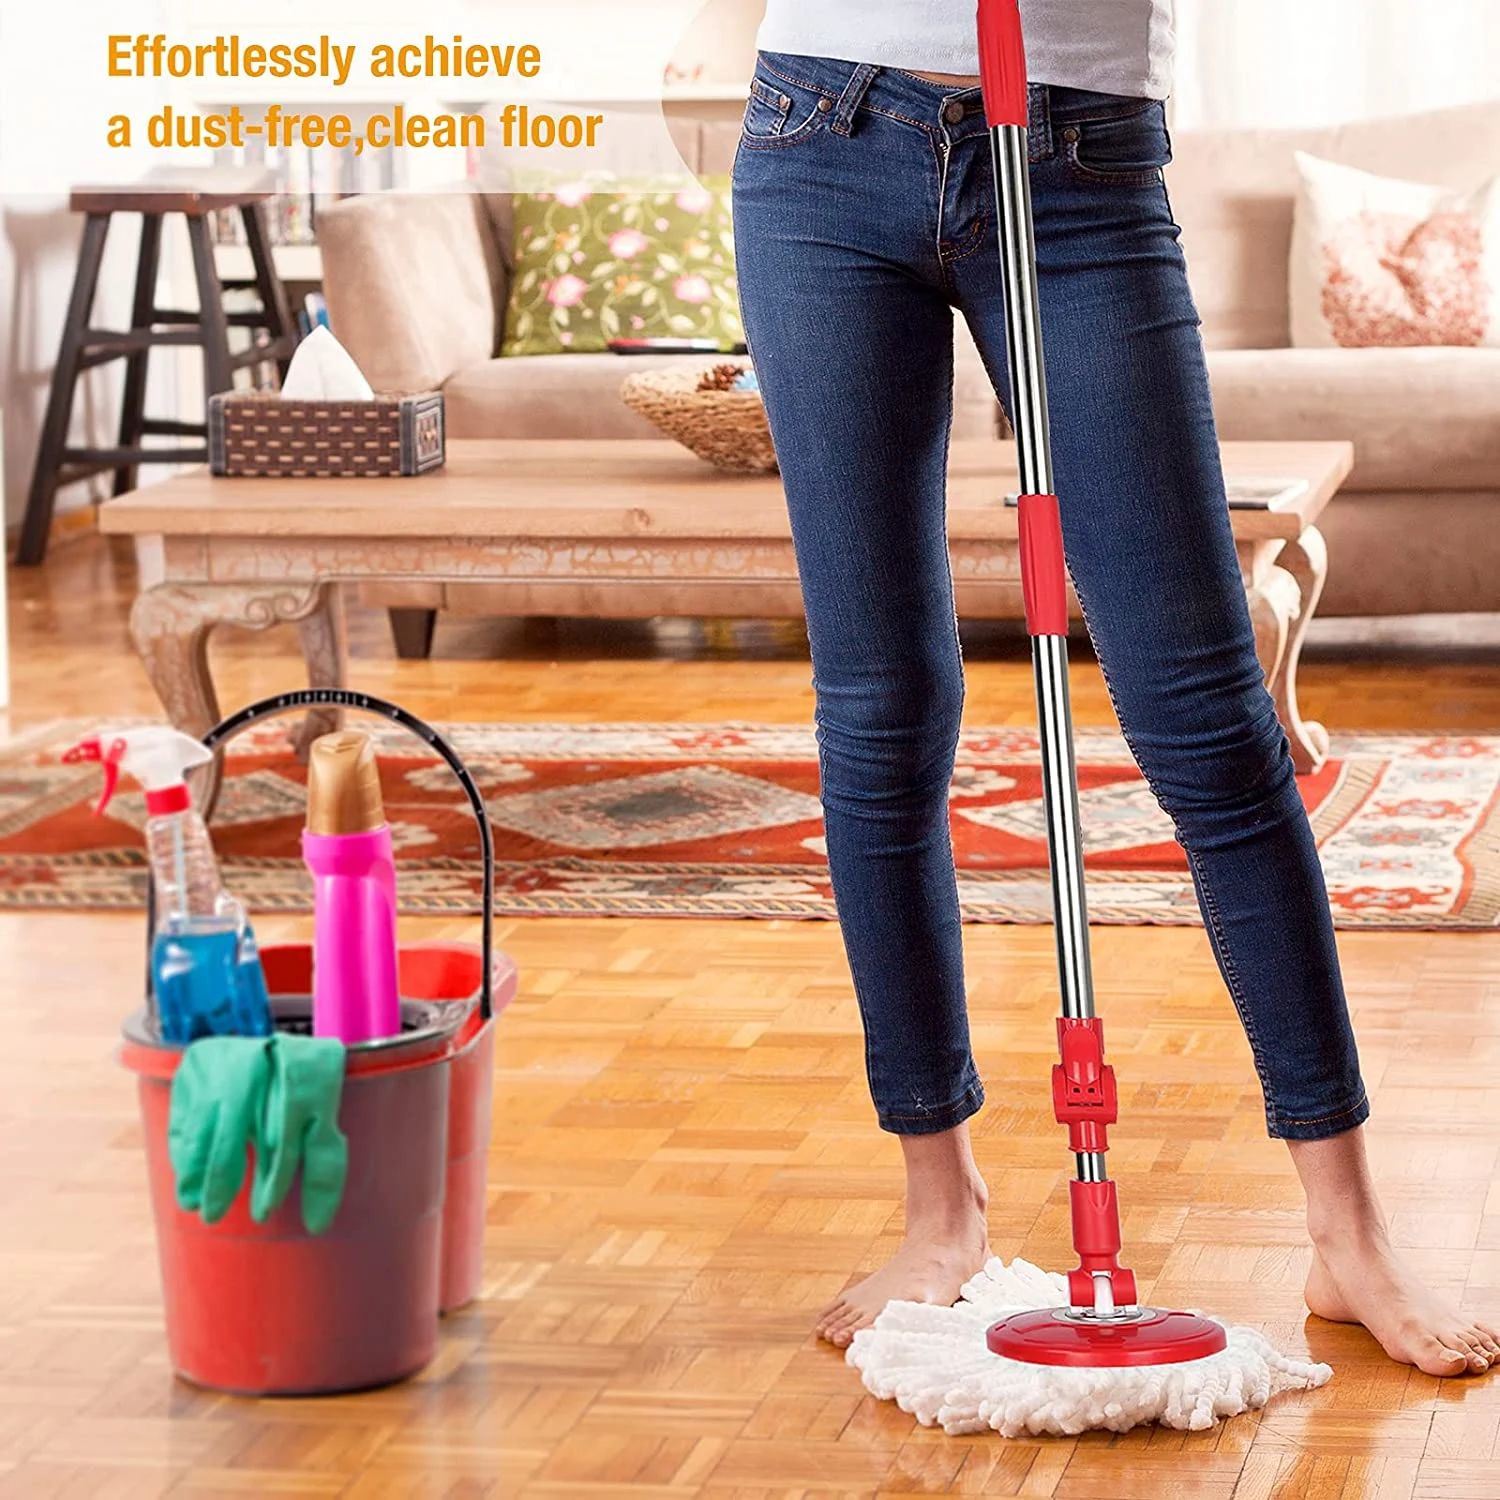 Spin Mop and Bucket with Wringer Set - for Home Kitchen Floor Cleaning - Wet/Dry Usage on Hardwood &amp; Tile - Upgraded Self-Balanced Easy Press System with 2 Washable Microfiber Mops Heads